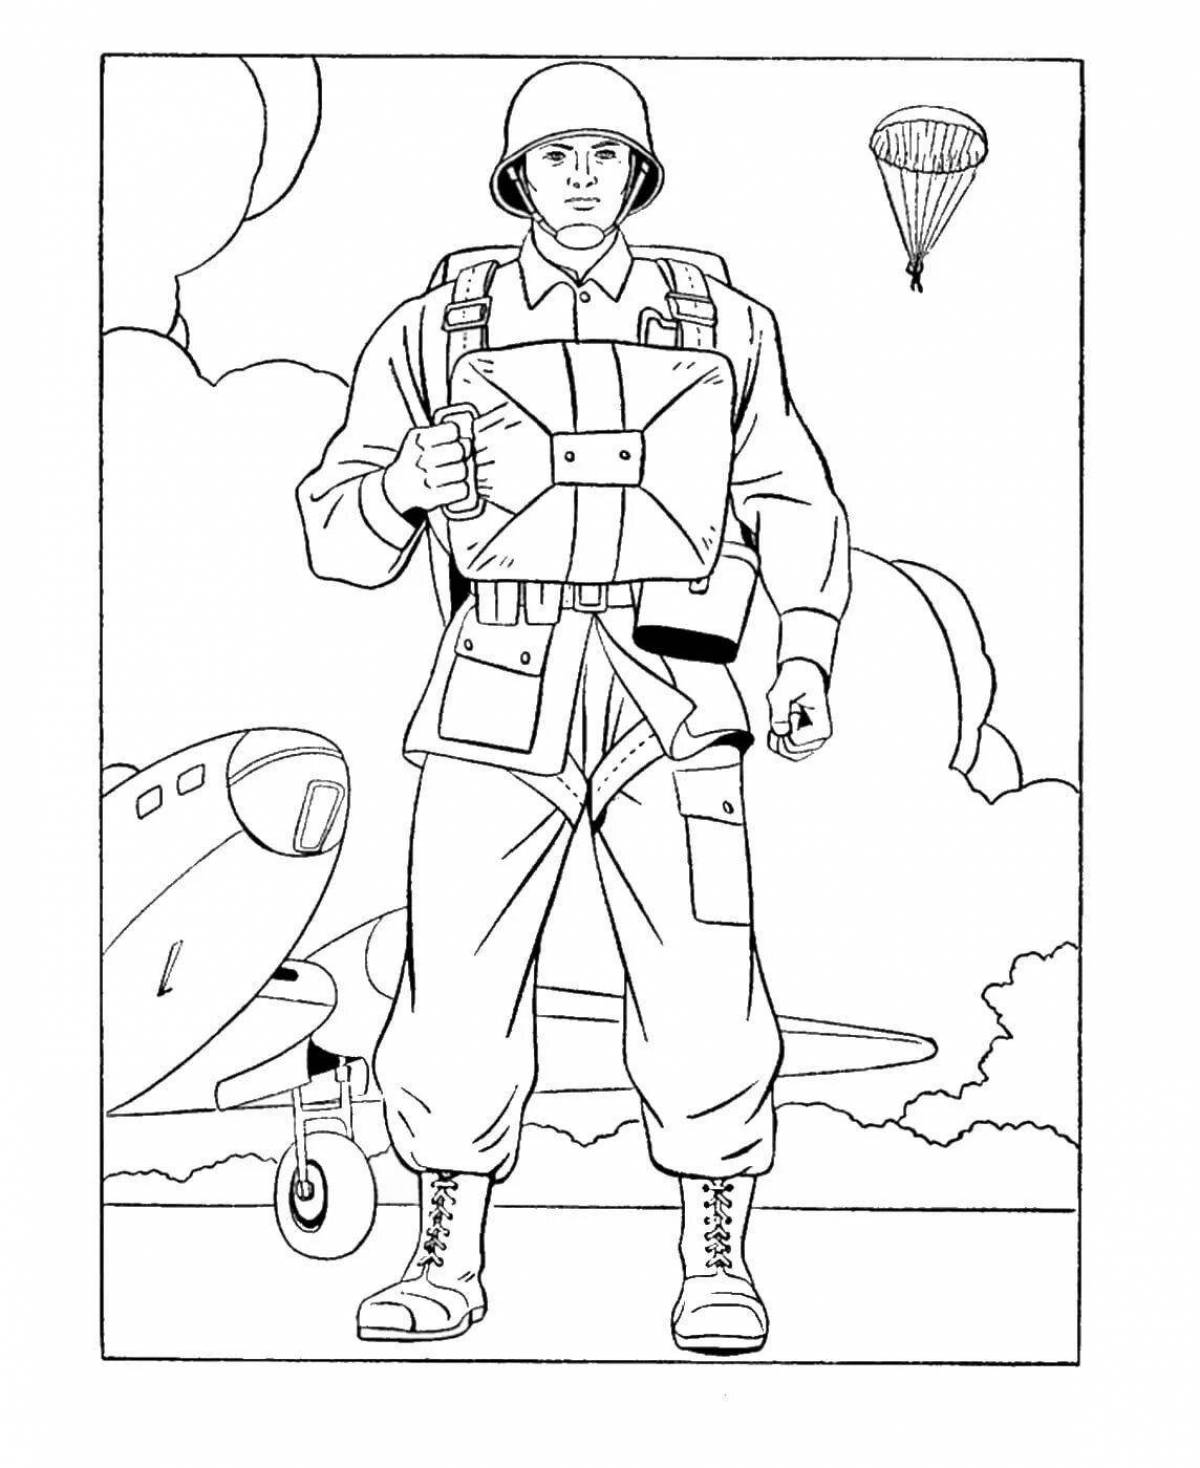 Fearless troops at war coloring page